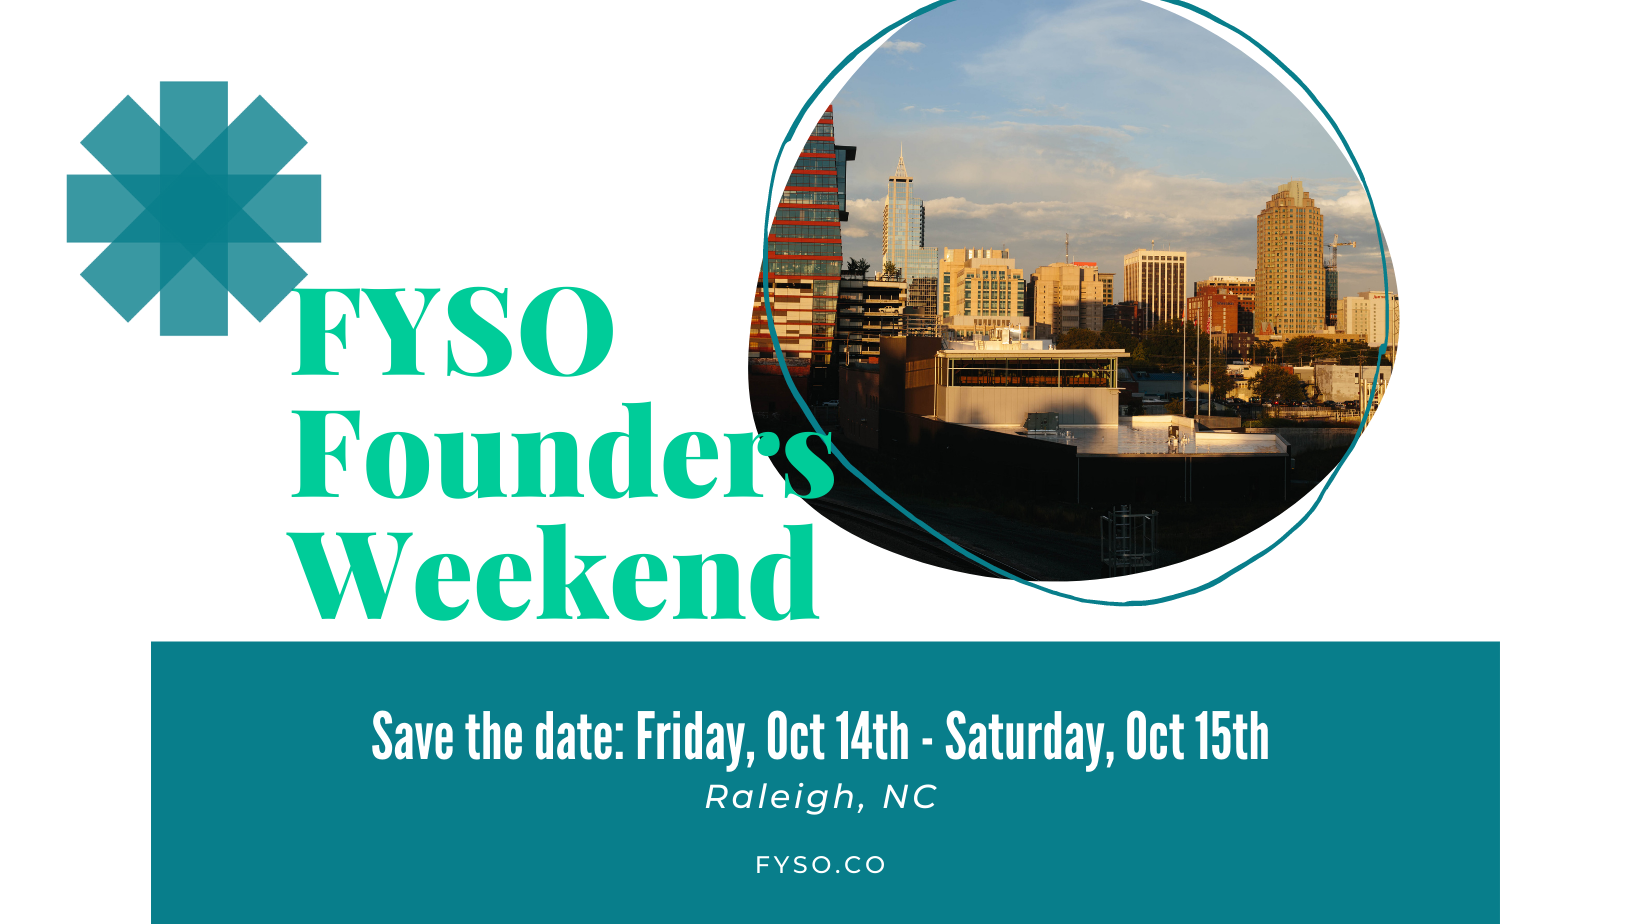 FYSO Founders Summit Annoucement. Save the Date: Friday, Oct 14 - Sat, Oct 15 in Raleigh, NC. Learn more at fyso.co!